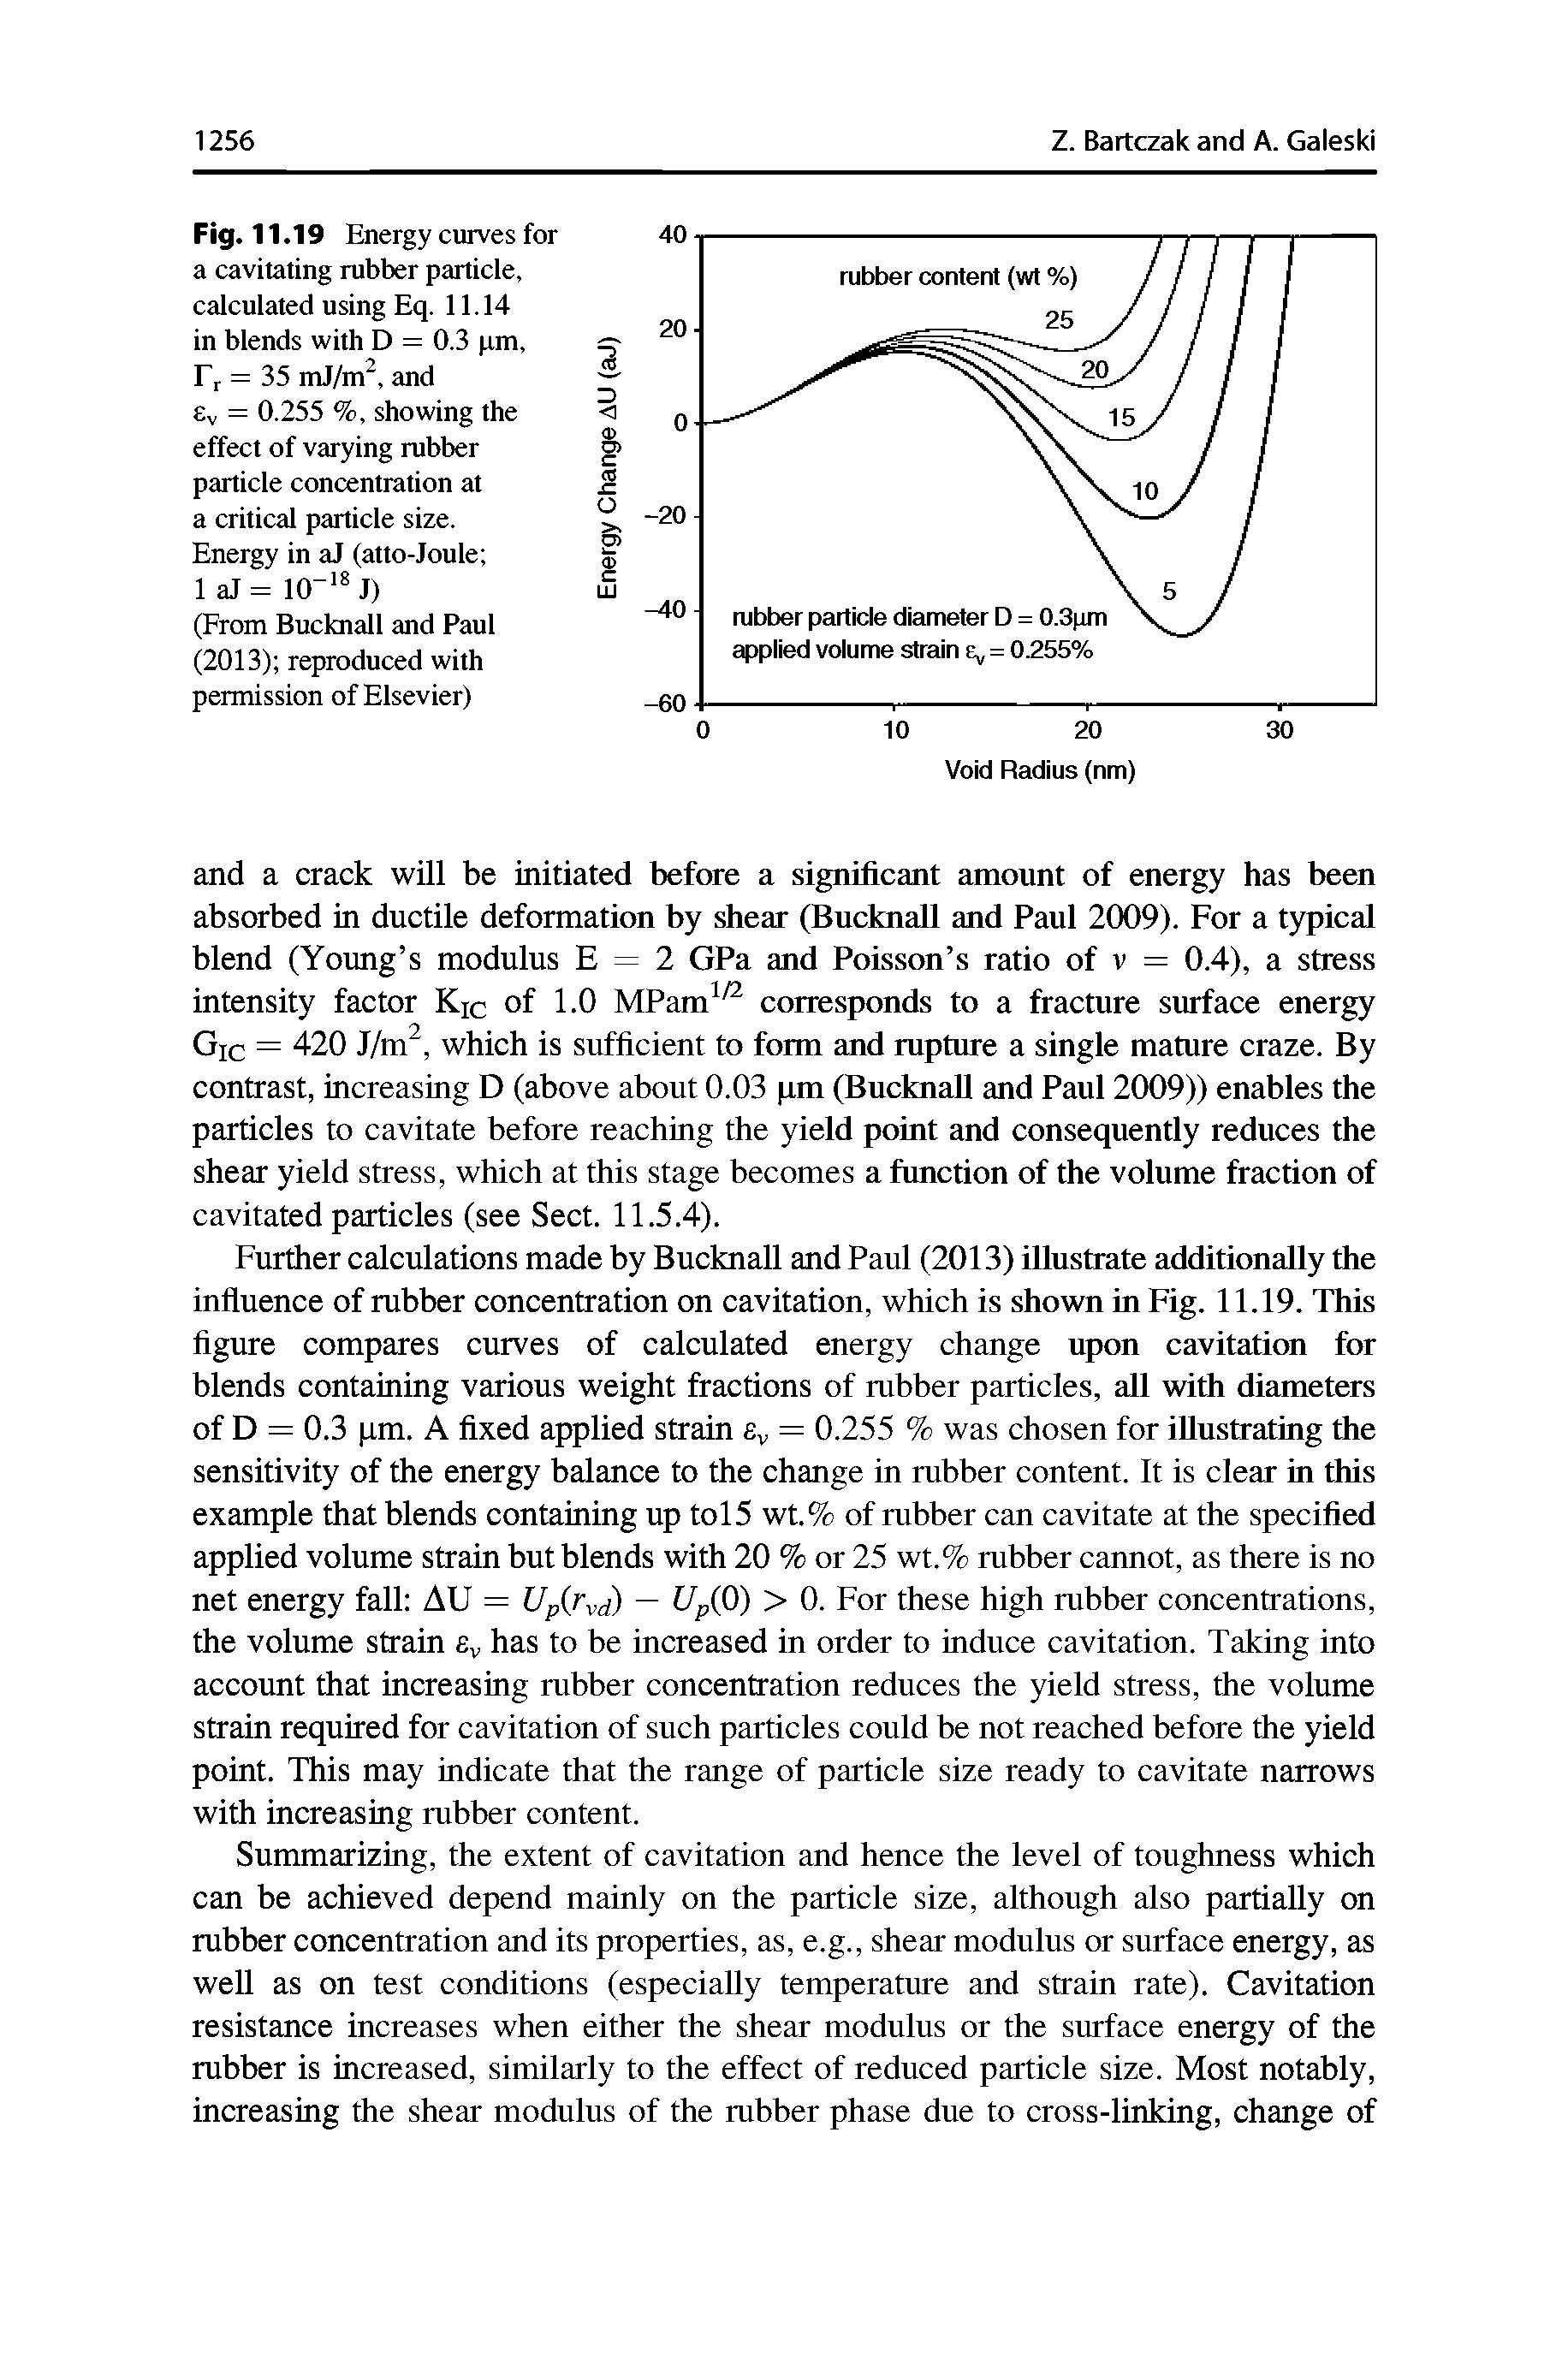 Fig. 11.19 Energy curves for a cavitating rubber particle, calculated using Eq. 11.14 in blends with D = 0.3 pm, r, = 35 and Sv = 0.255 %, showing the effect of varying rubber particle concentration at a critical particle size.